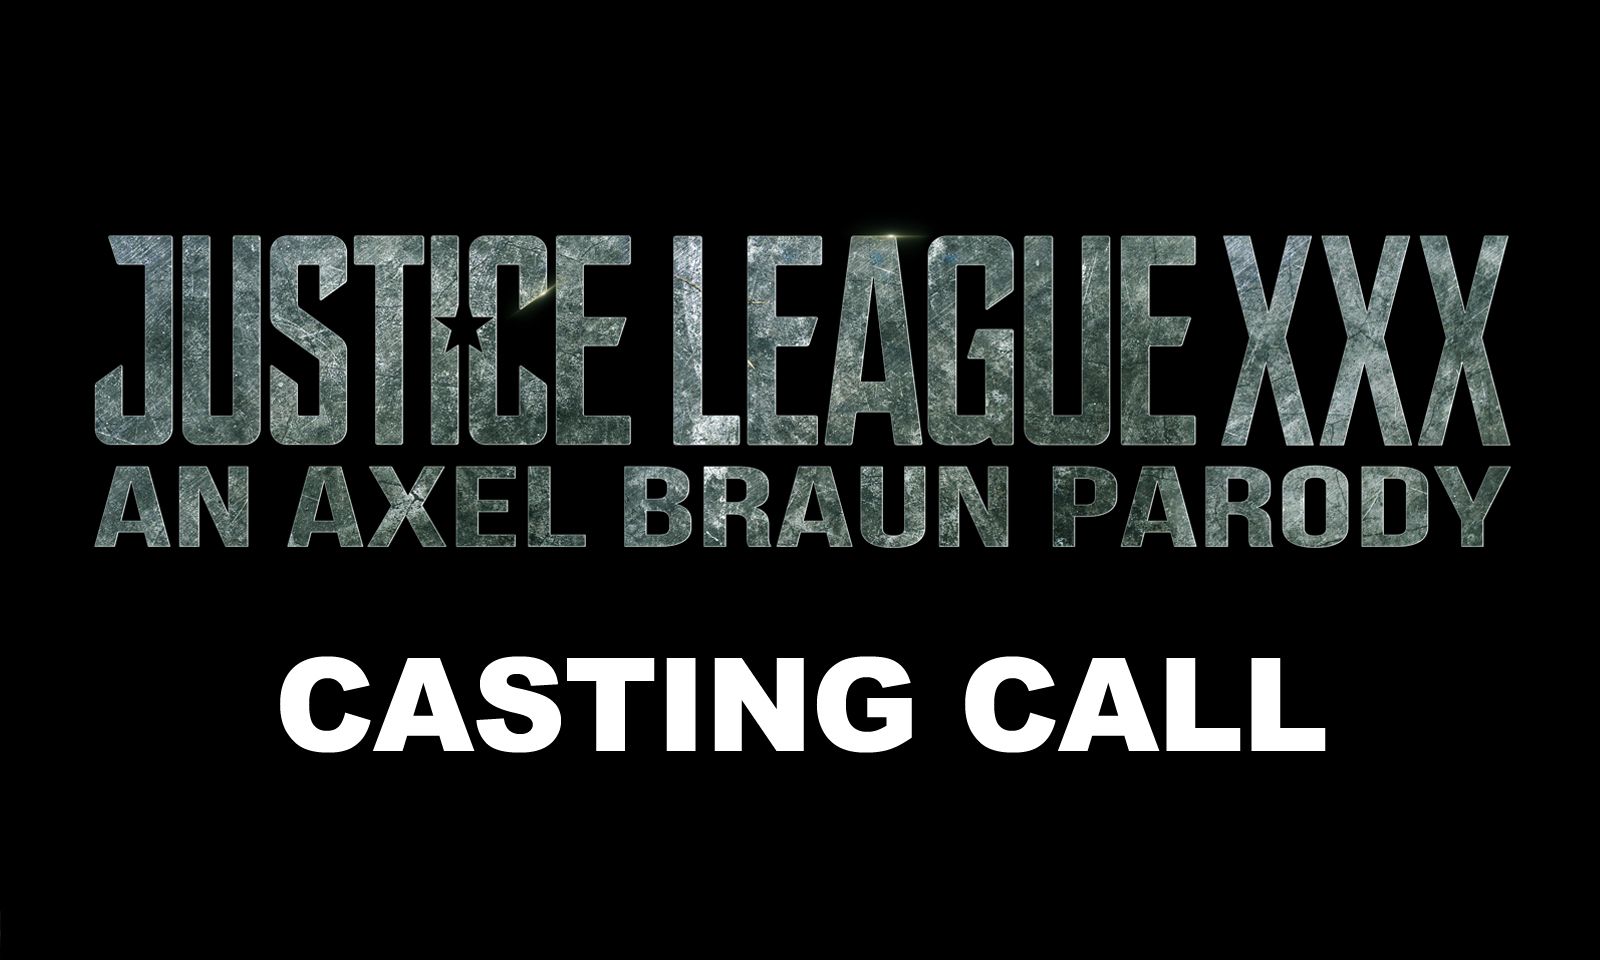 Axel Braun to Hold Casting Call Sun. for 'Justice League XXX'